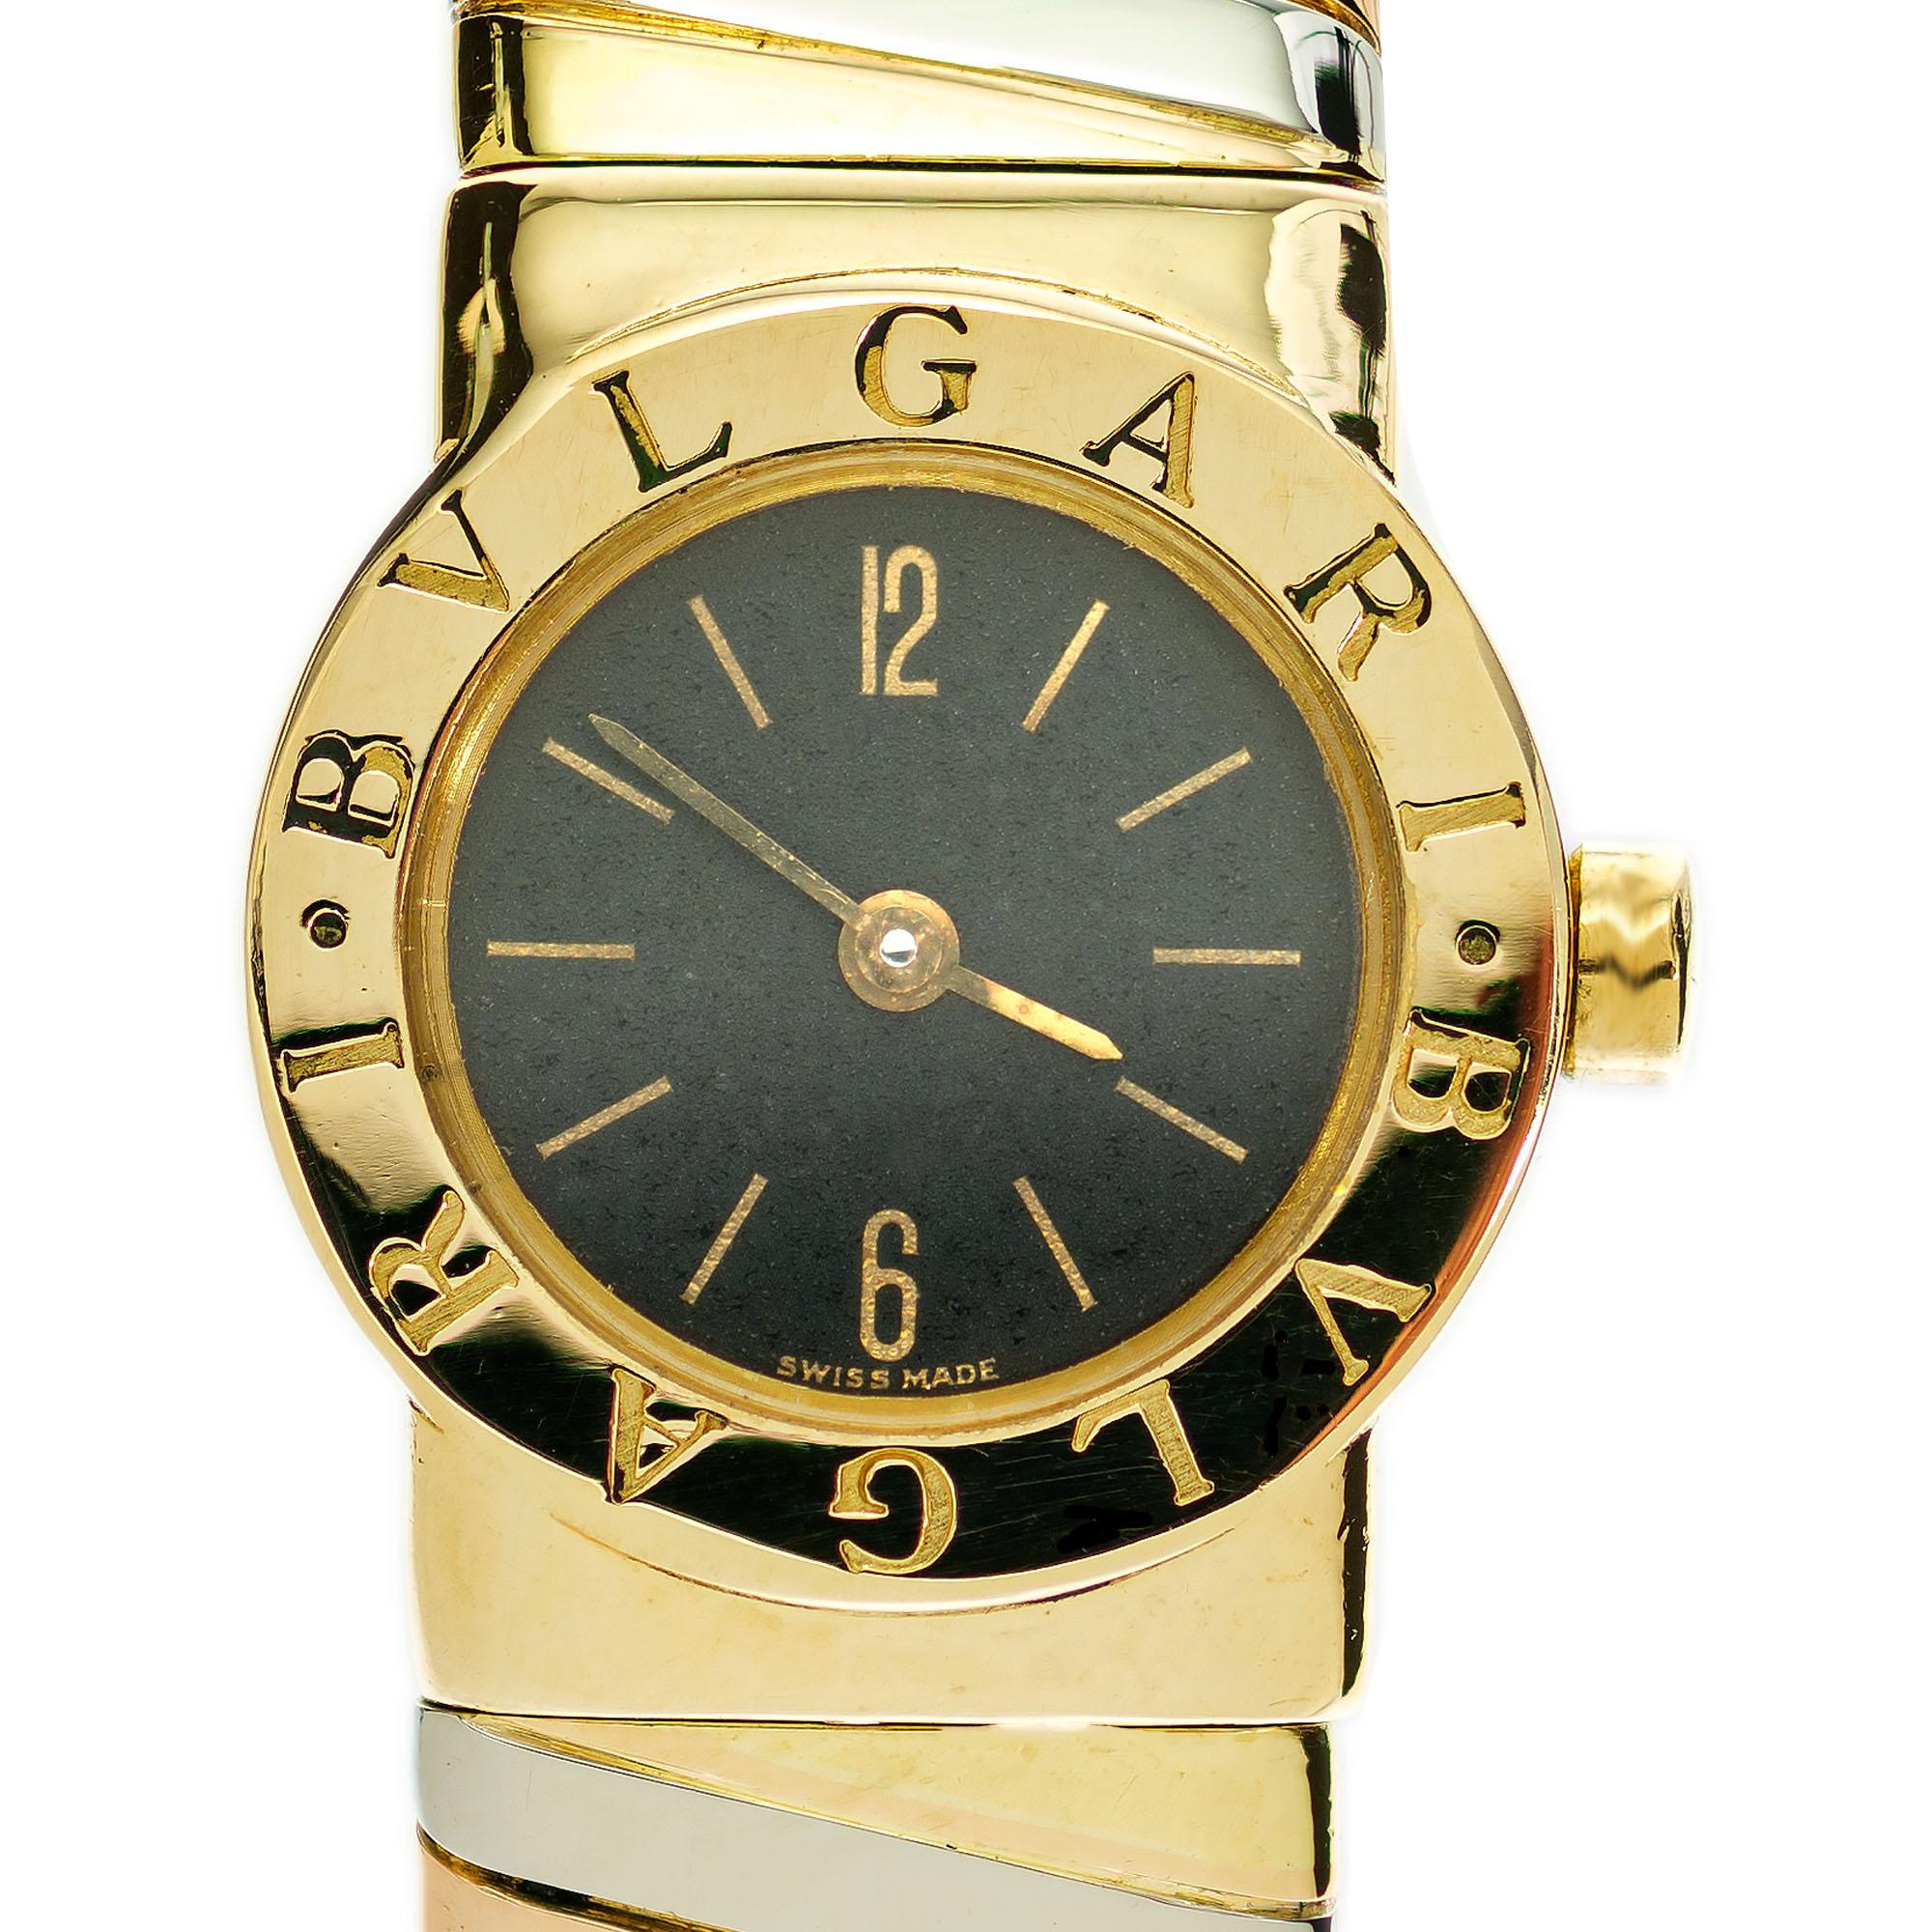 Bvlgari lady's 18k three-color gold Tubogas bangle watch, with quartz movement, 18k, yellow, white and rose gold. circa 1990s.

63.2 grams
Fits a standard 6 1/2 to 7 inch wrist
Width without crown: 19.1mm
Band width at case: 13.62mm
Case thickness: